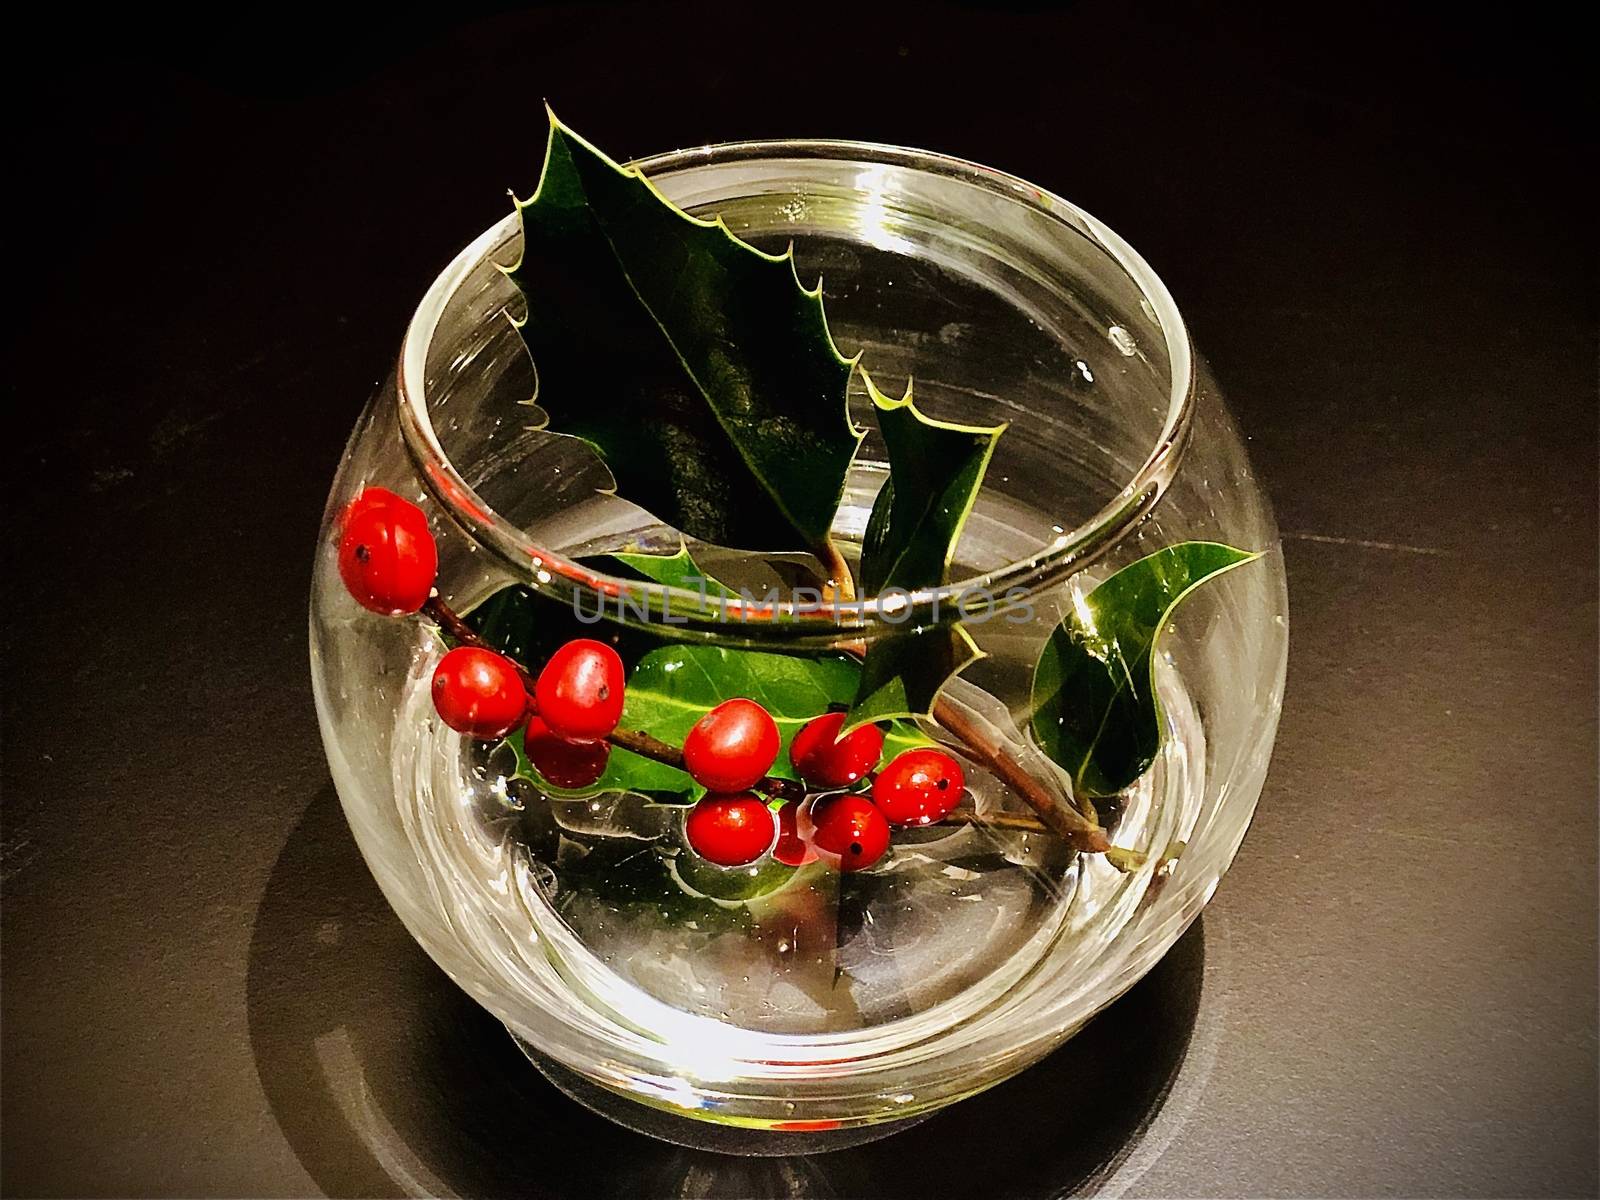 Mistletoe in a glass isolated on black. Holiday Season Christmas concept